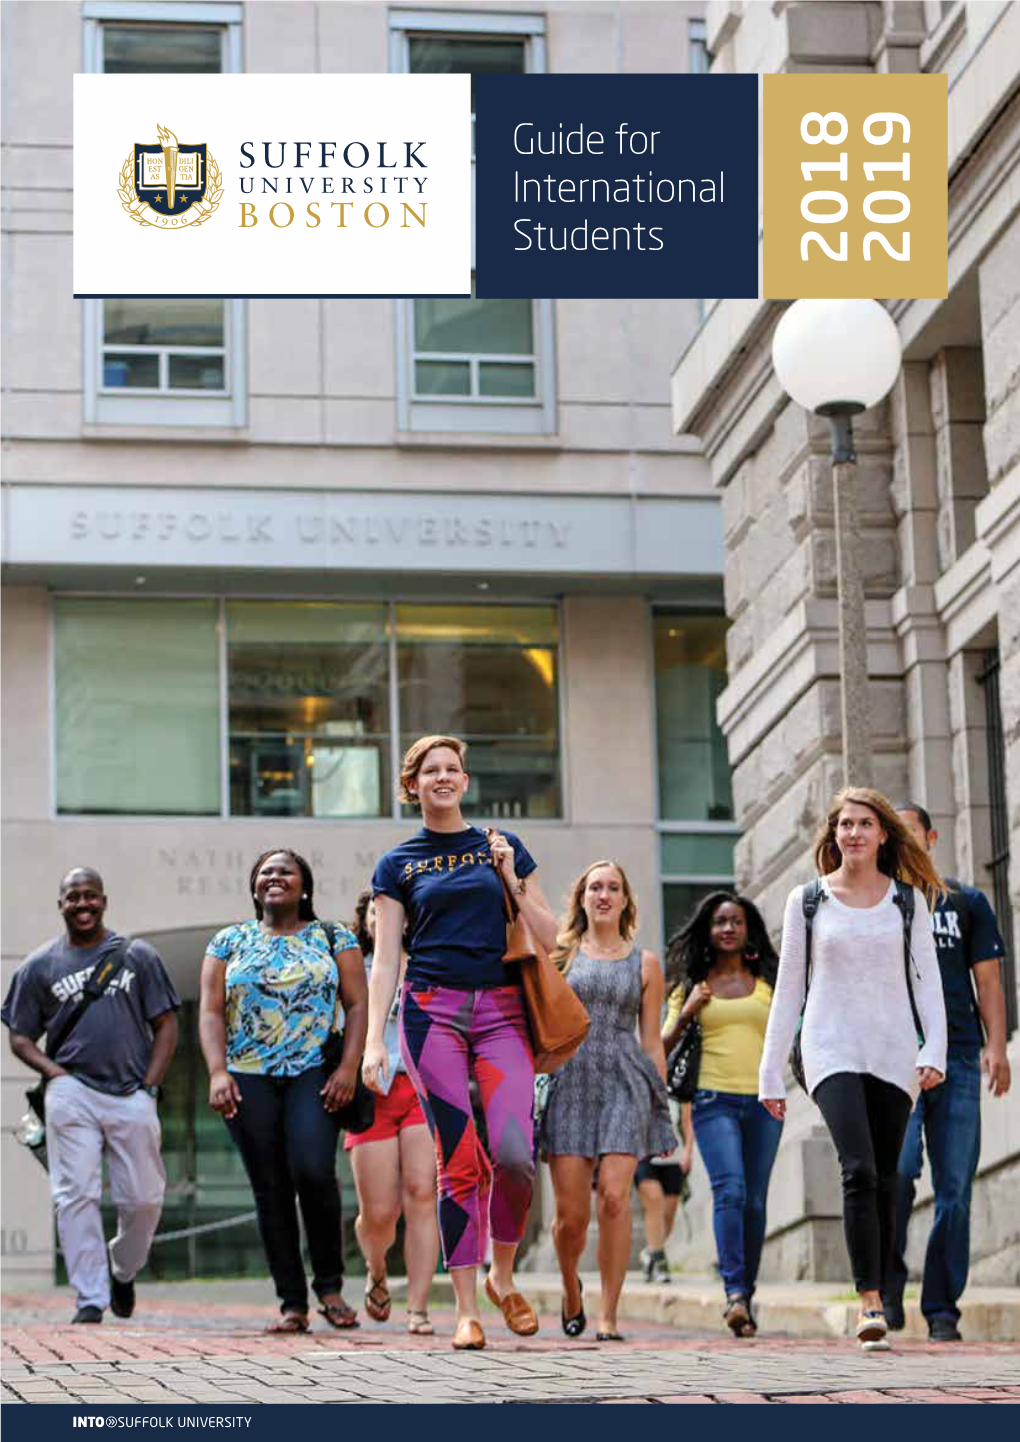 Guide for International Students Why Choose Suffolk University?